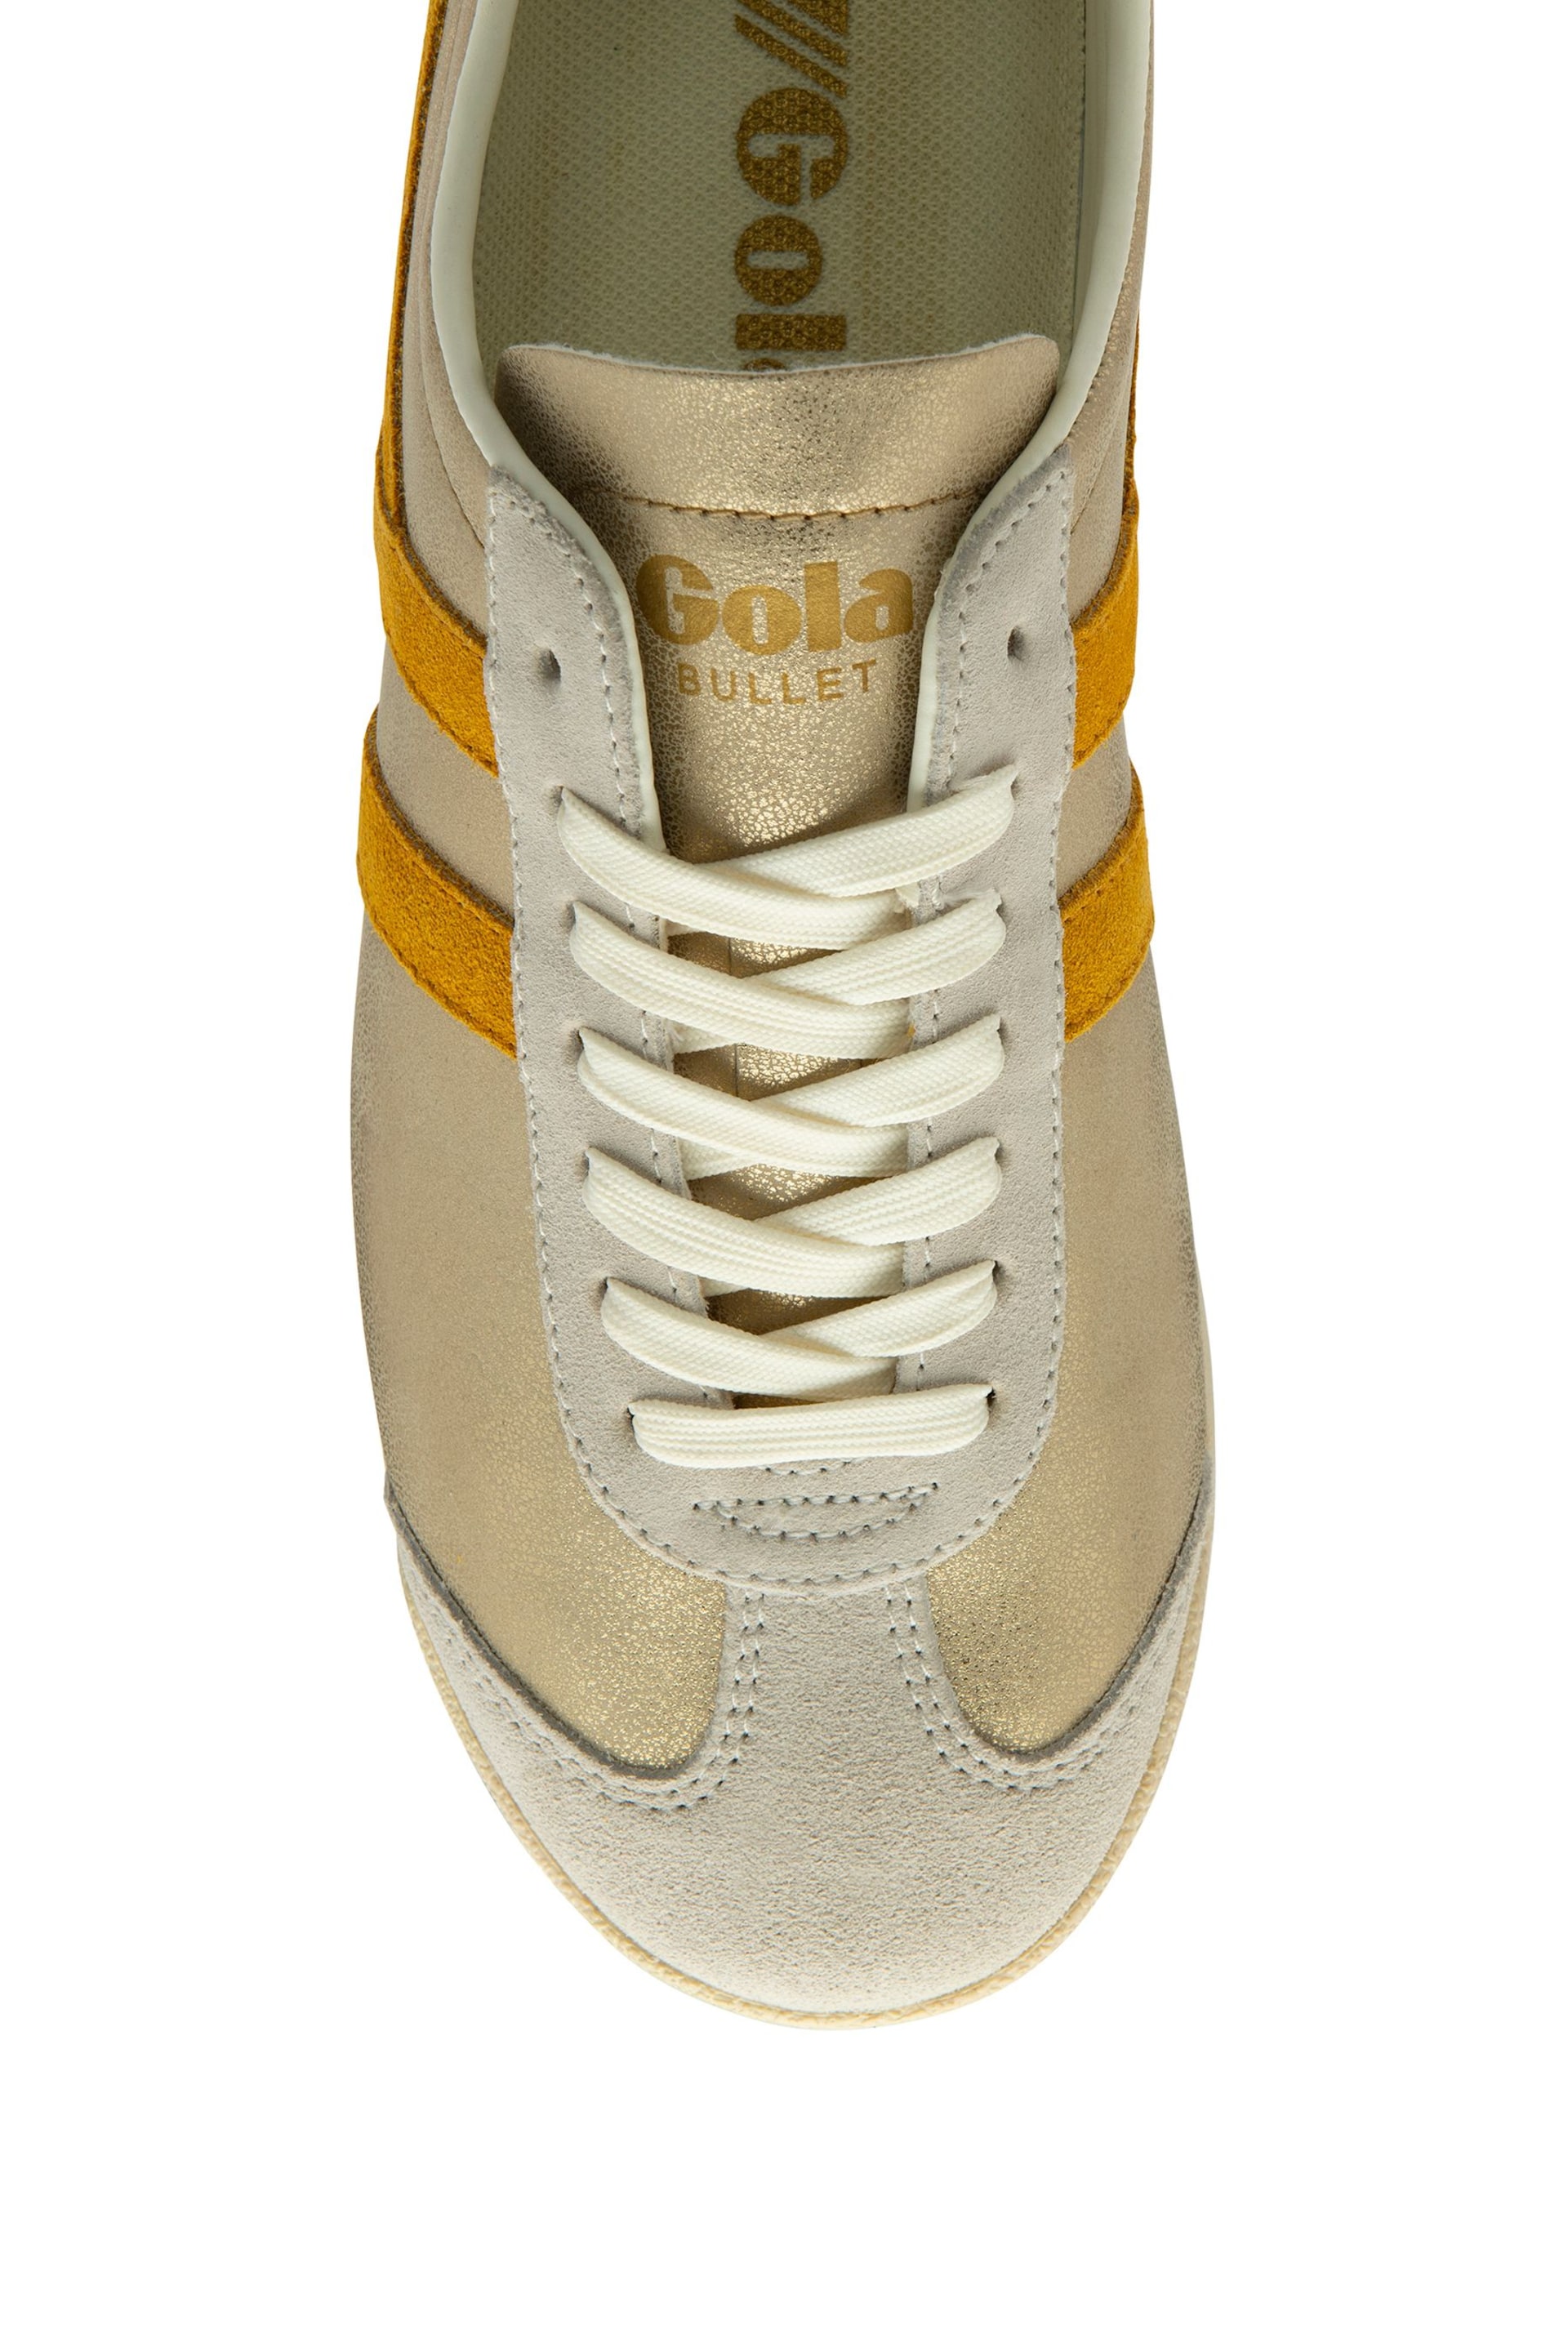 Gola Corn gold Ladies Bullet Blaze Lace Up Trainers - Image 4 of 4